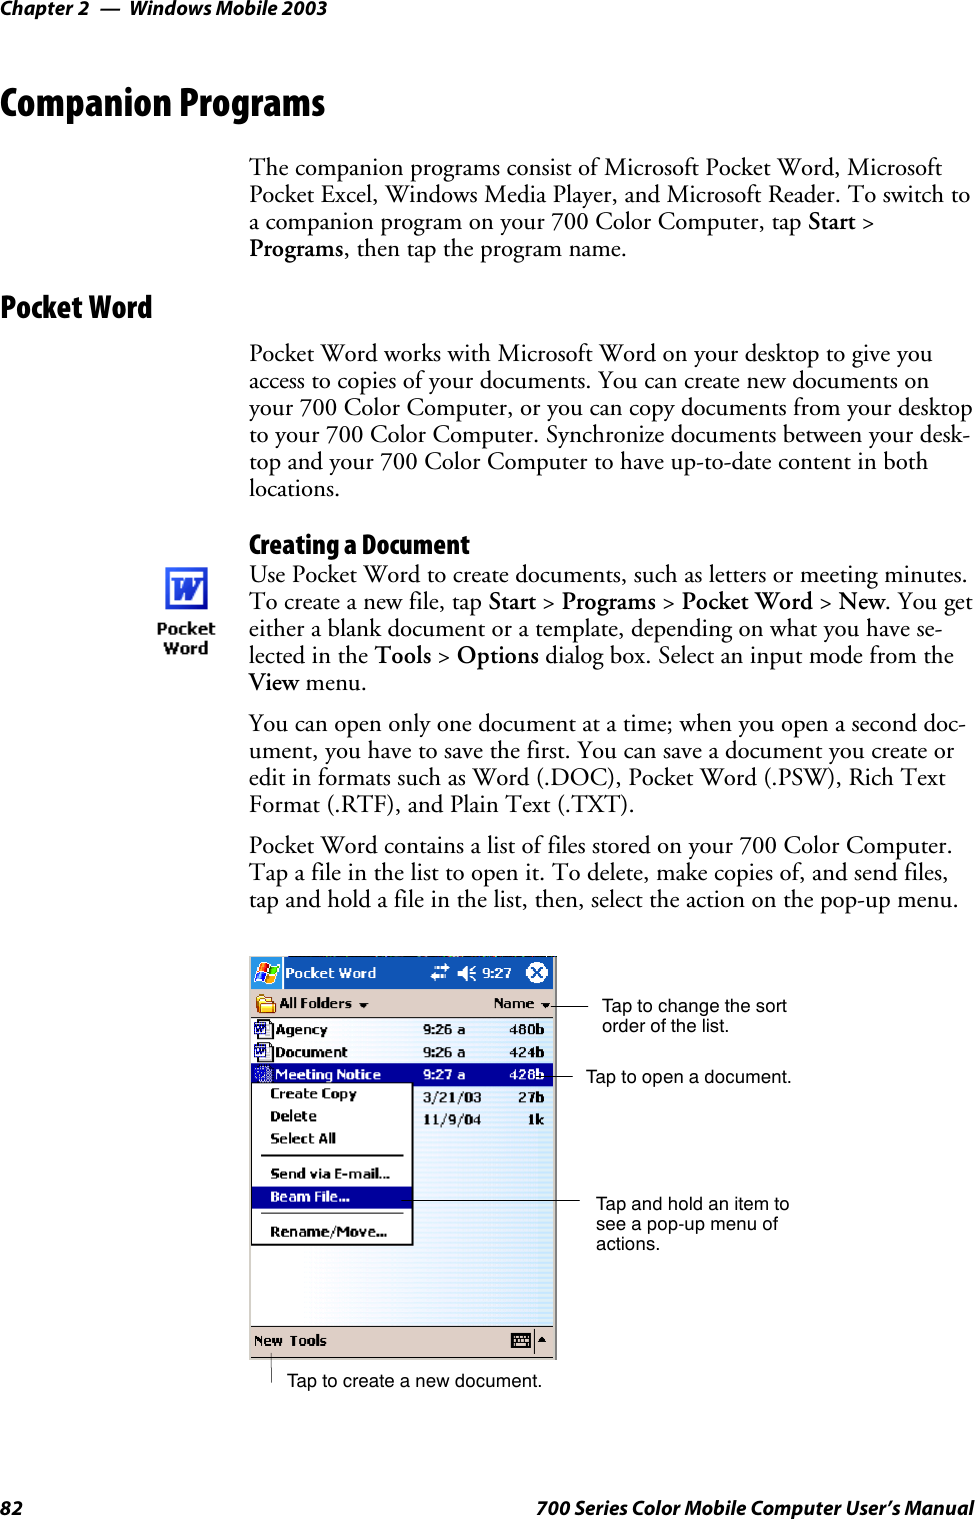 Windows Mobile 2003Chapter —282 700 Series Color Mobile Computer User’s ManualCompanion ProgramsThe companion programs consist of Microsoft Pocket Word, MicrosoftPocket Excel, Windows Media Player, and Microsoft Reader. To switch toa companion program on your 700 Color Computer, tap Start &gt;Programs, then tap the program name.Pocket WordPocket Word works with Microsoft Word on your desktop to give youaccess to copies of your documents. You can create new documents onyour 700 Color Computer, or you can copy documents from your desktopto your 700 Color Computer. Synchronize documents between your desk-top and your 700 Color Computer to have up-to-date content in bothlocations.Creating a DocumentUse Pocket Word to create documents, such as letters or meeting minutes.To create a new file, tap Start &gt;Programs &gt;Pocket Word &gt;New.Yougeteither a blank document or a template, depending on what you have se-lected in the Tools &gt;Options dialog box. Select an input mode from theView menu.You can open only one document at a time; when you open a second doc-ument, you have to save the first. You can save a document you create oredit in formats such as Word (.DOC), Pocket Word (.PSW), Rich TextFormat (.RTF), and Plain Text (.TXT).Pocket Word contains a list of files stored on your 700 Color Computer.Tap a file in the list to open it. To delete, make copies of, and send files,tap and hold a file in the list, then, select the action on the pop-up menu.Tap to change the sortorder of the list.Tap to create a new document.Tap to open a document.Tap and hold an item tosee a pop-up menu ofactions.